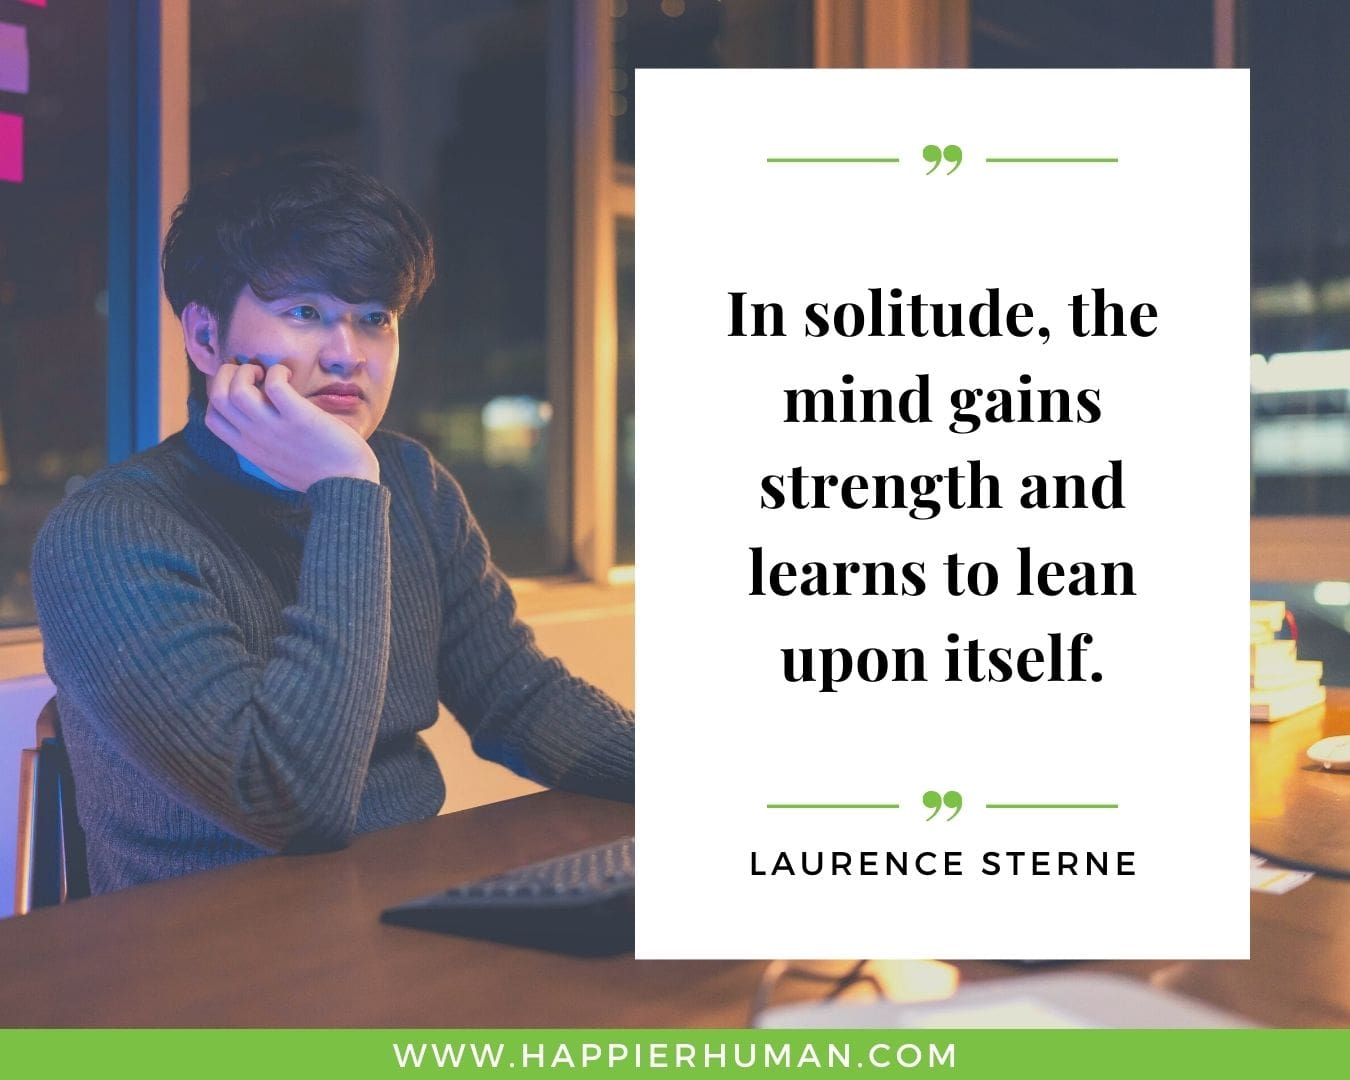 Loneliness Quotes - “In solitude, the mind gains strength and learns to lean upon itself.”– Laurence Sterne